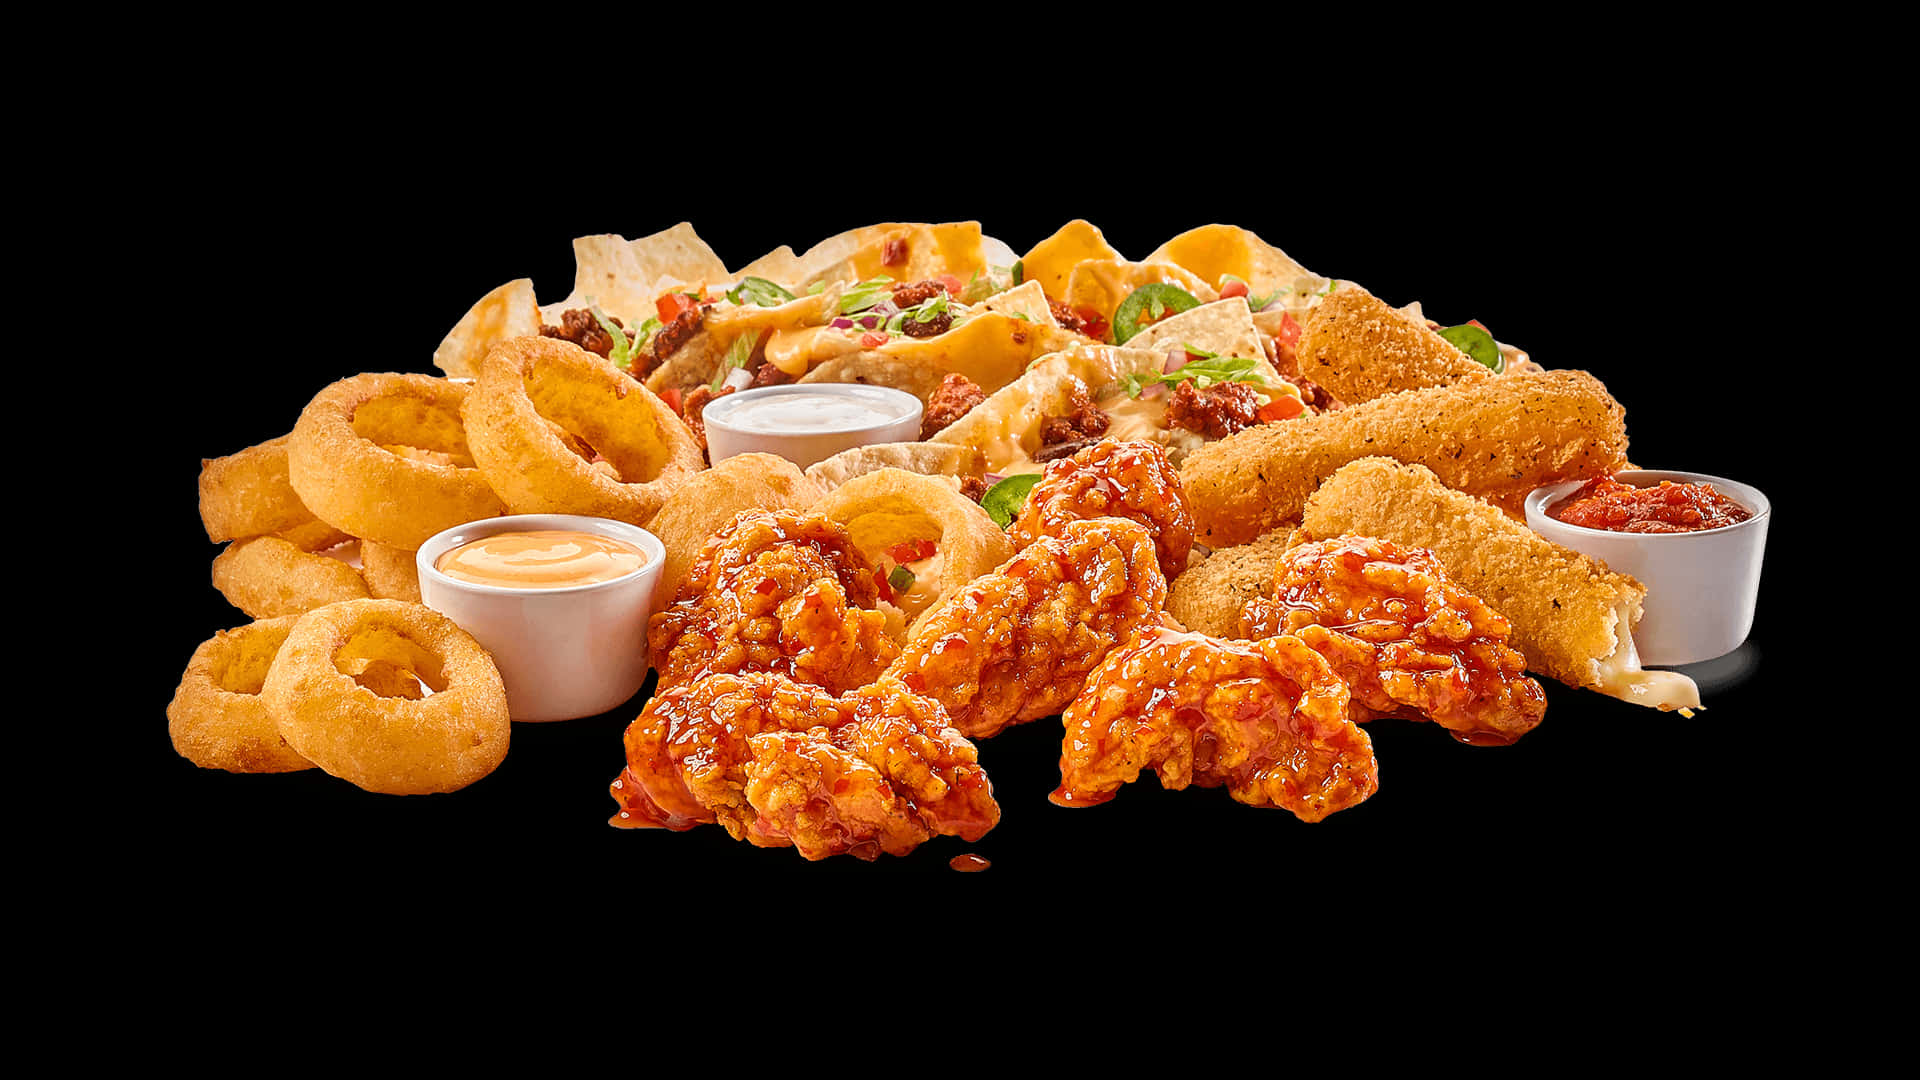 Feast on wings, fries, and more at Buffalo Wild Wings